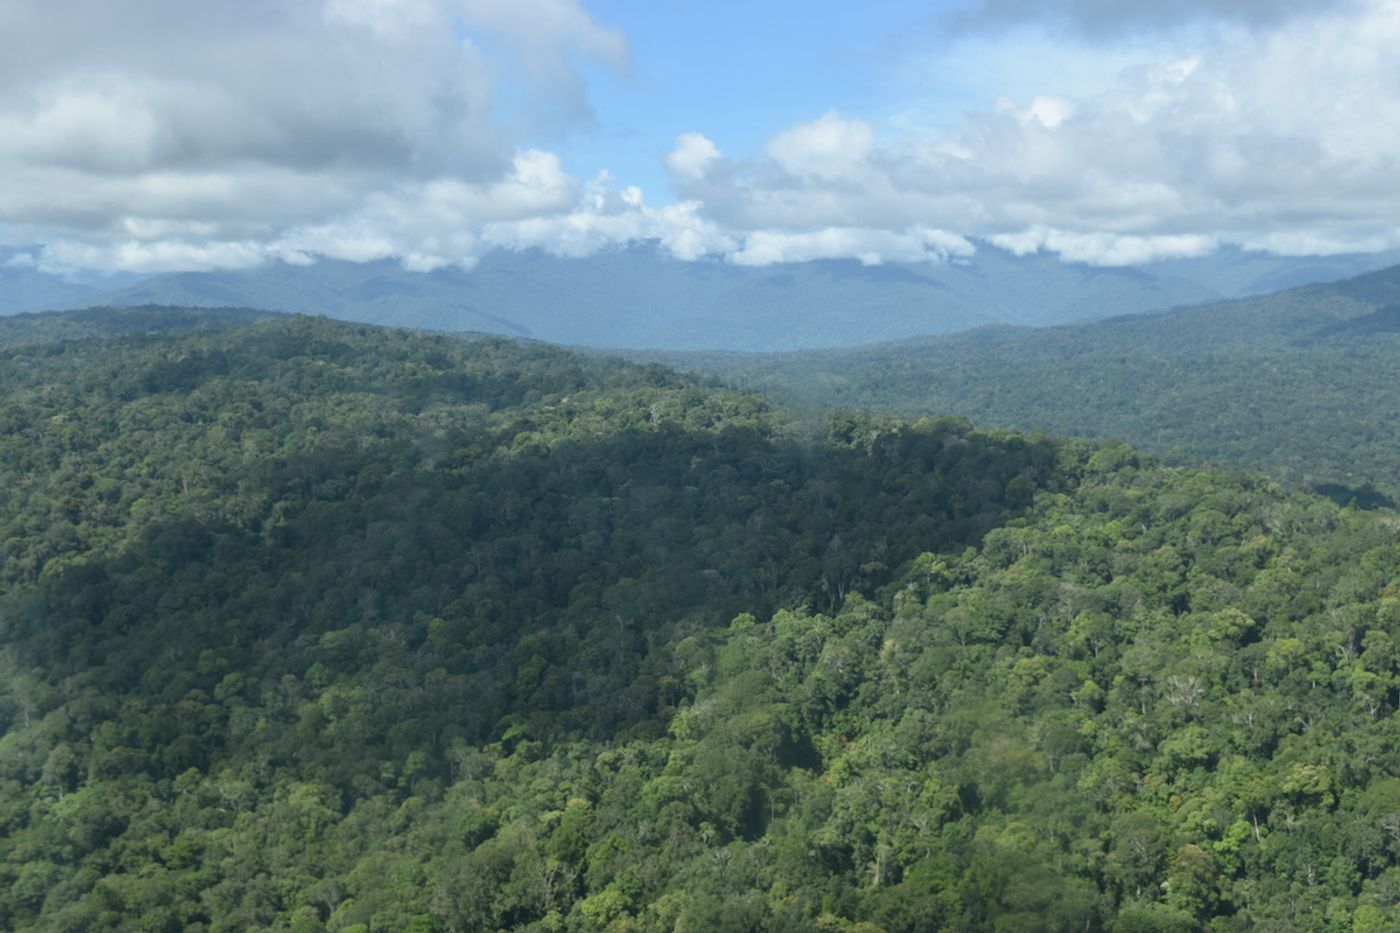 Primary forests are now protected in the Managalas Plateau. Photo: Rainforest Foundation Norway